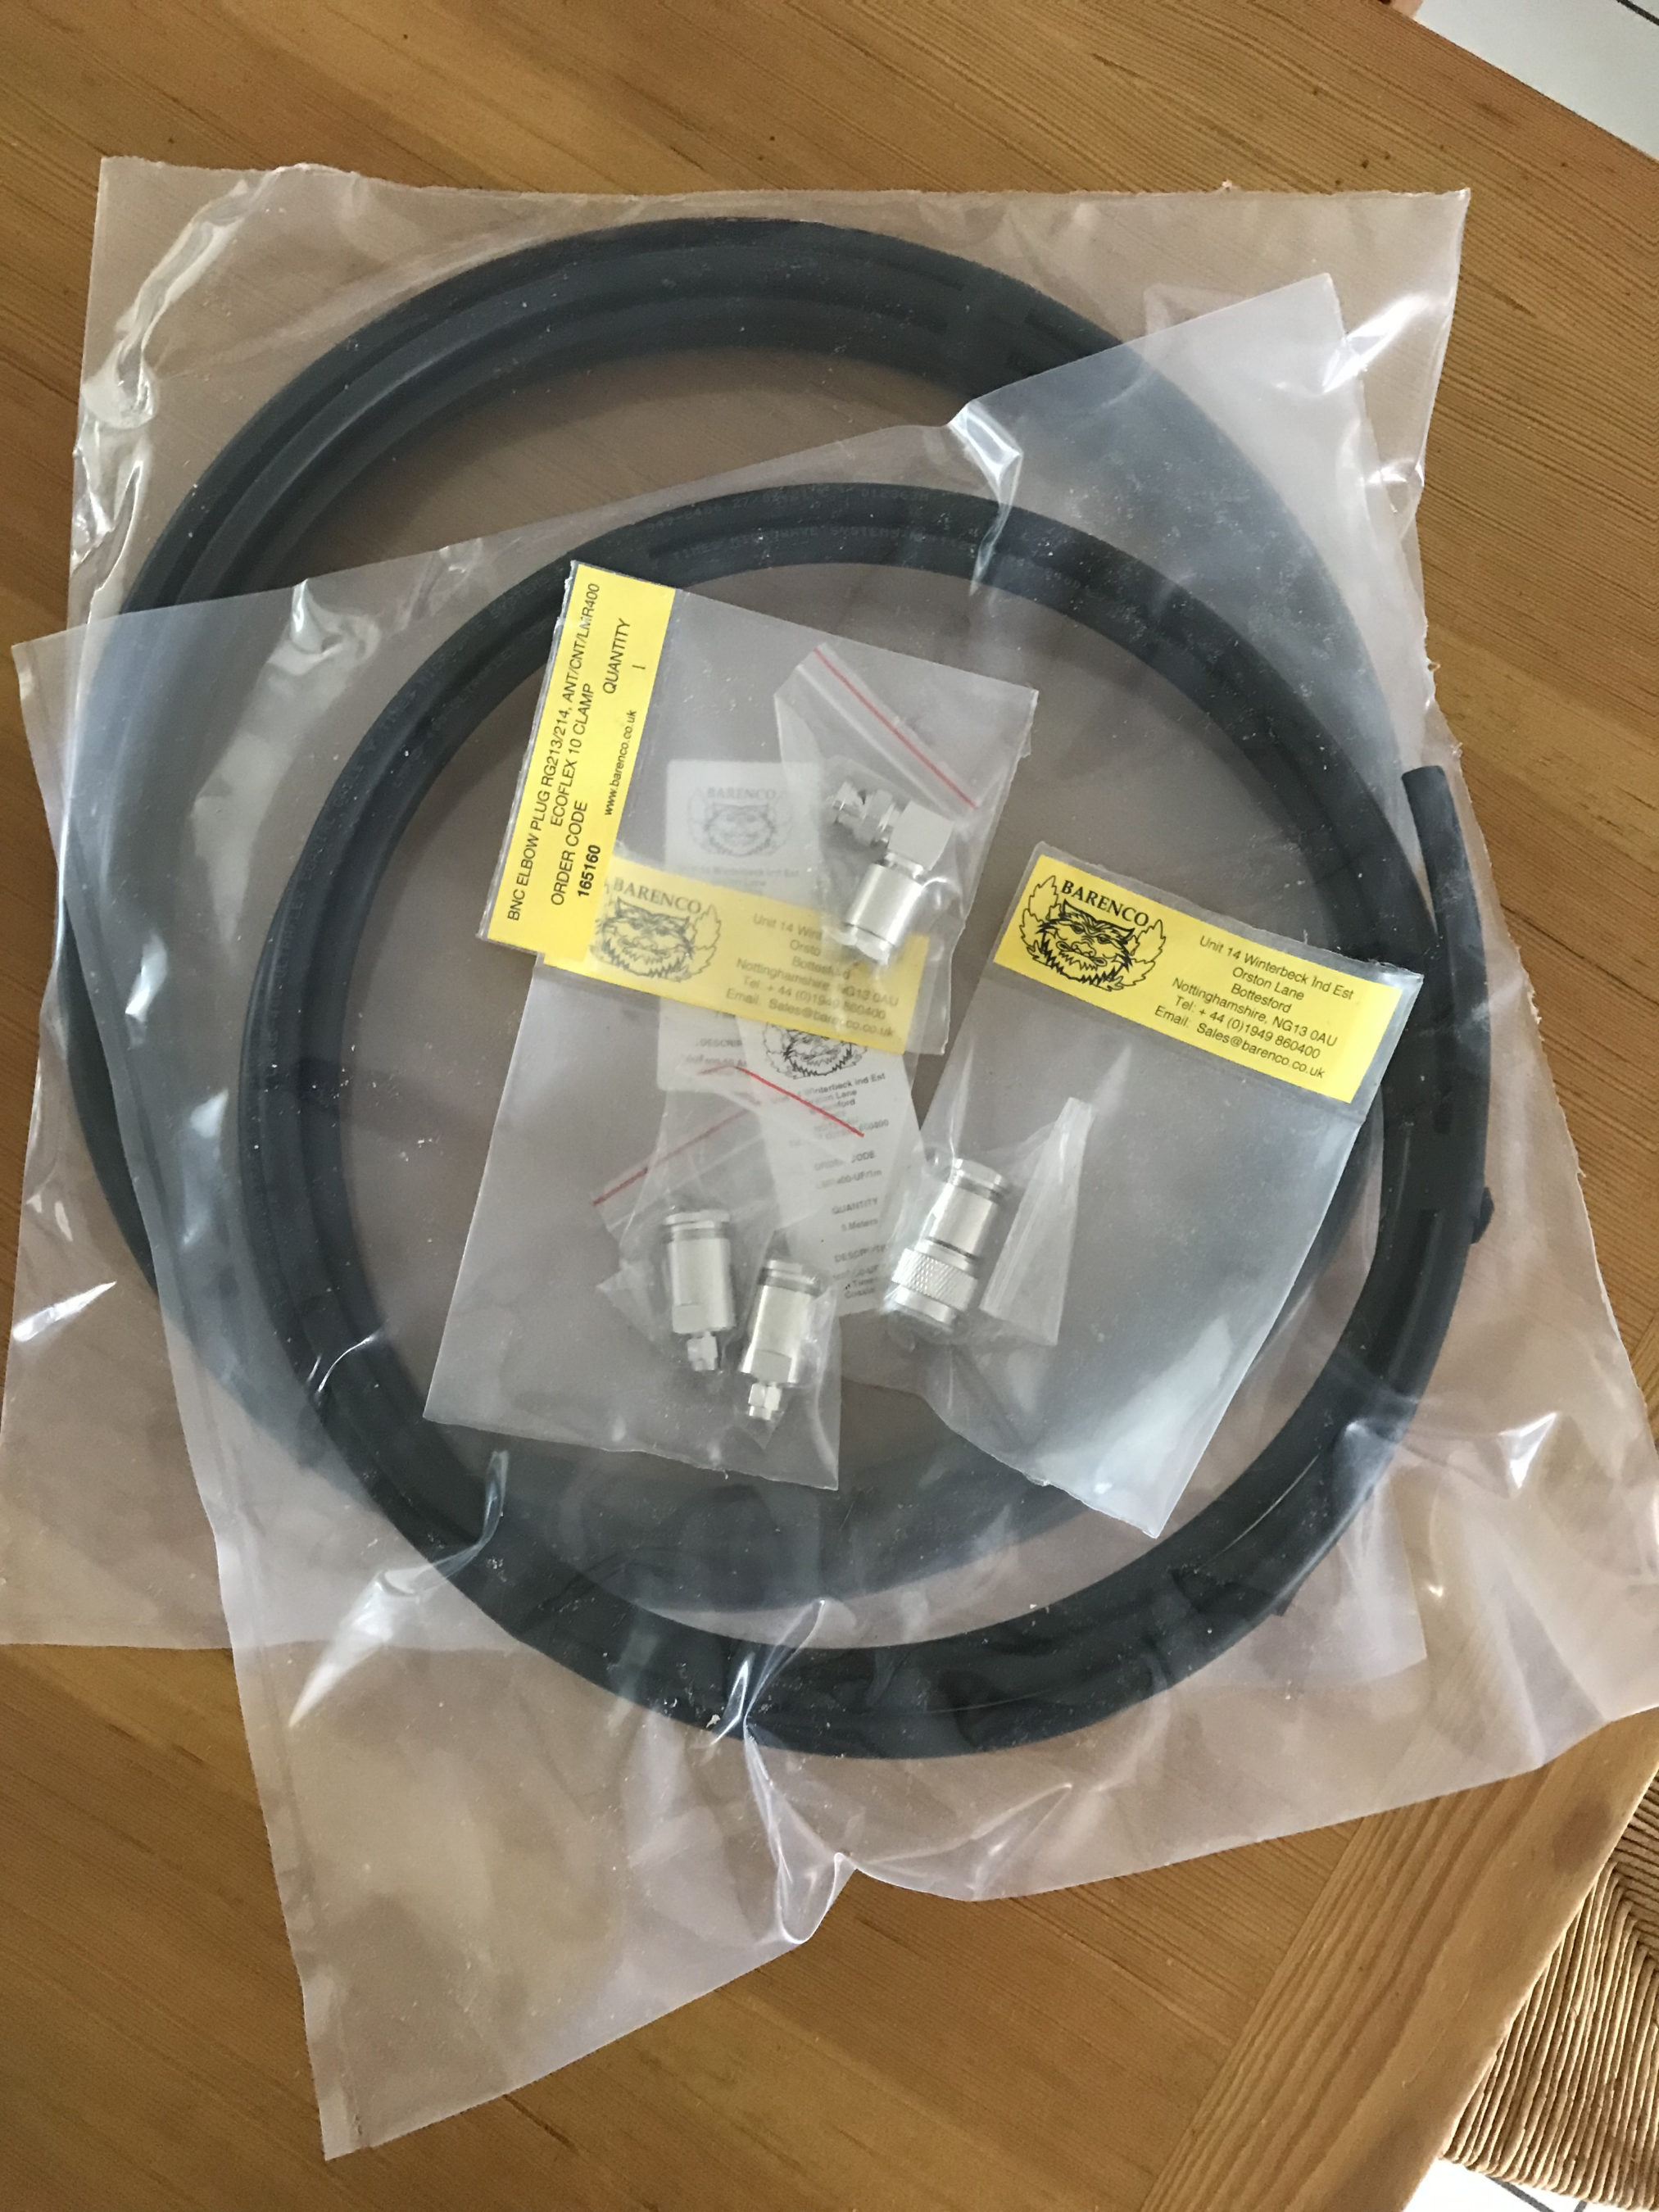 M0AWS LMR-400-UF coax from Barenco